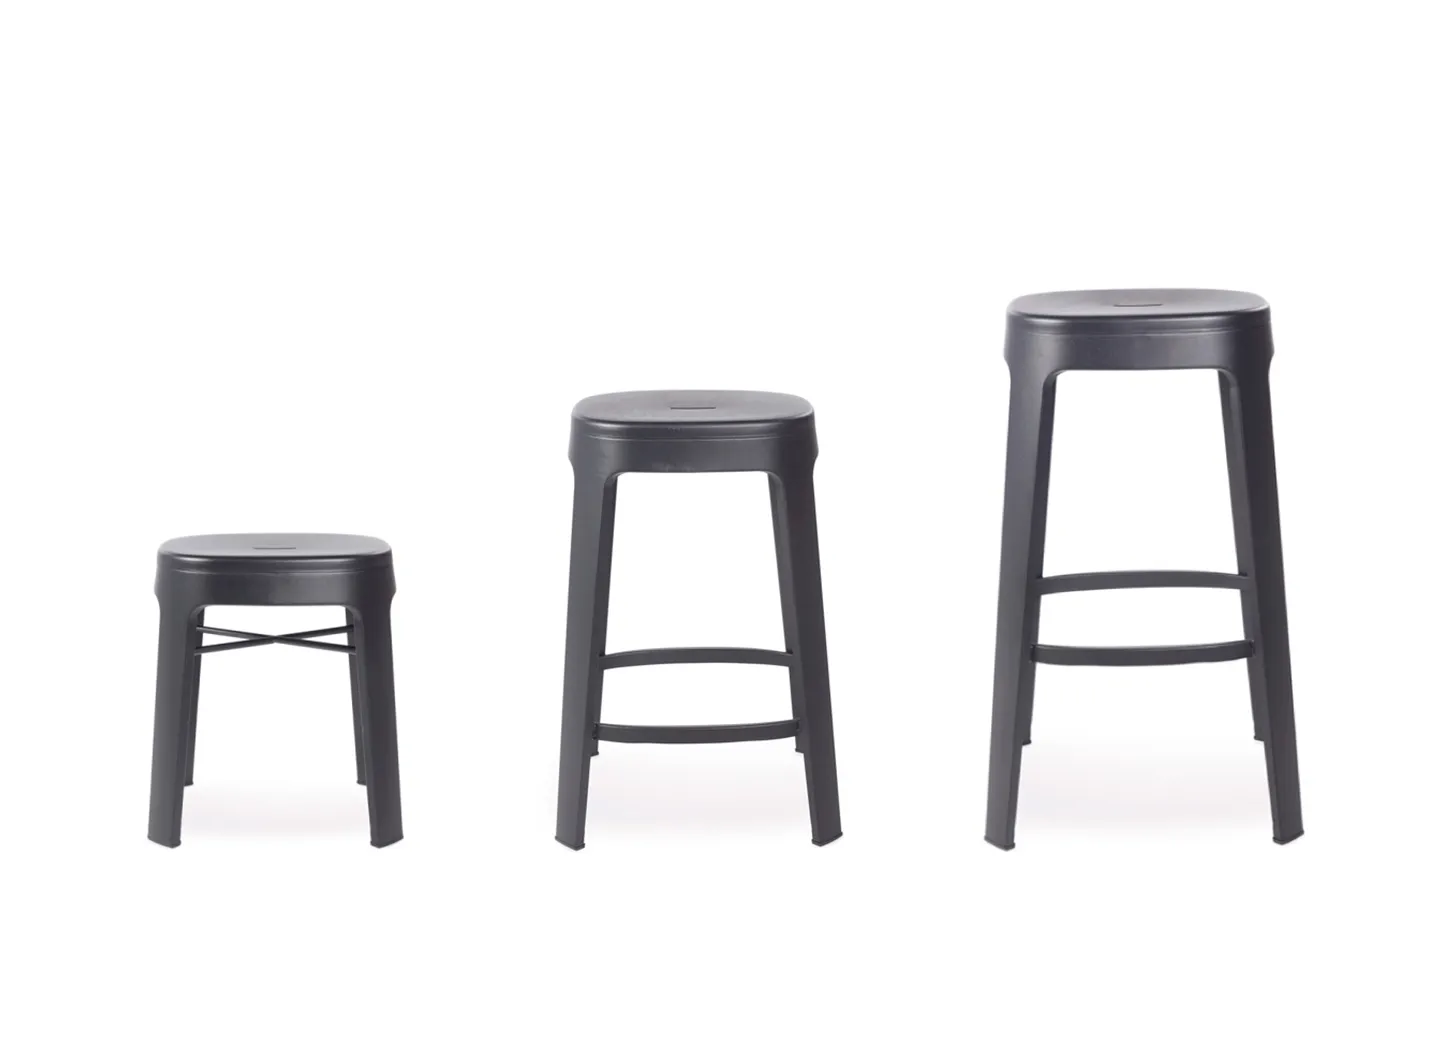 RS Barcelona Ombra stool collection for indoor and outdoor use